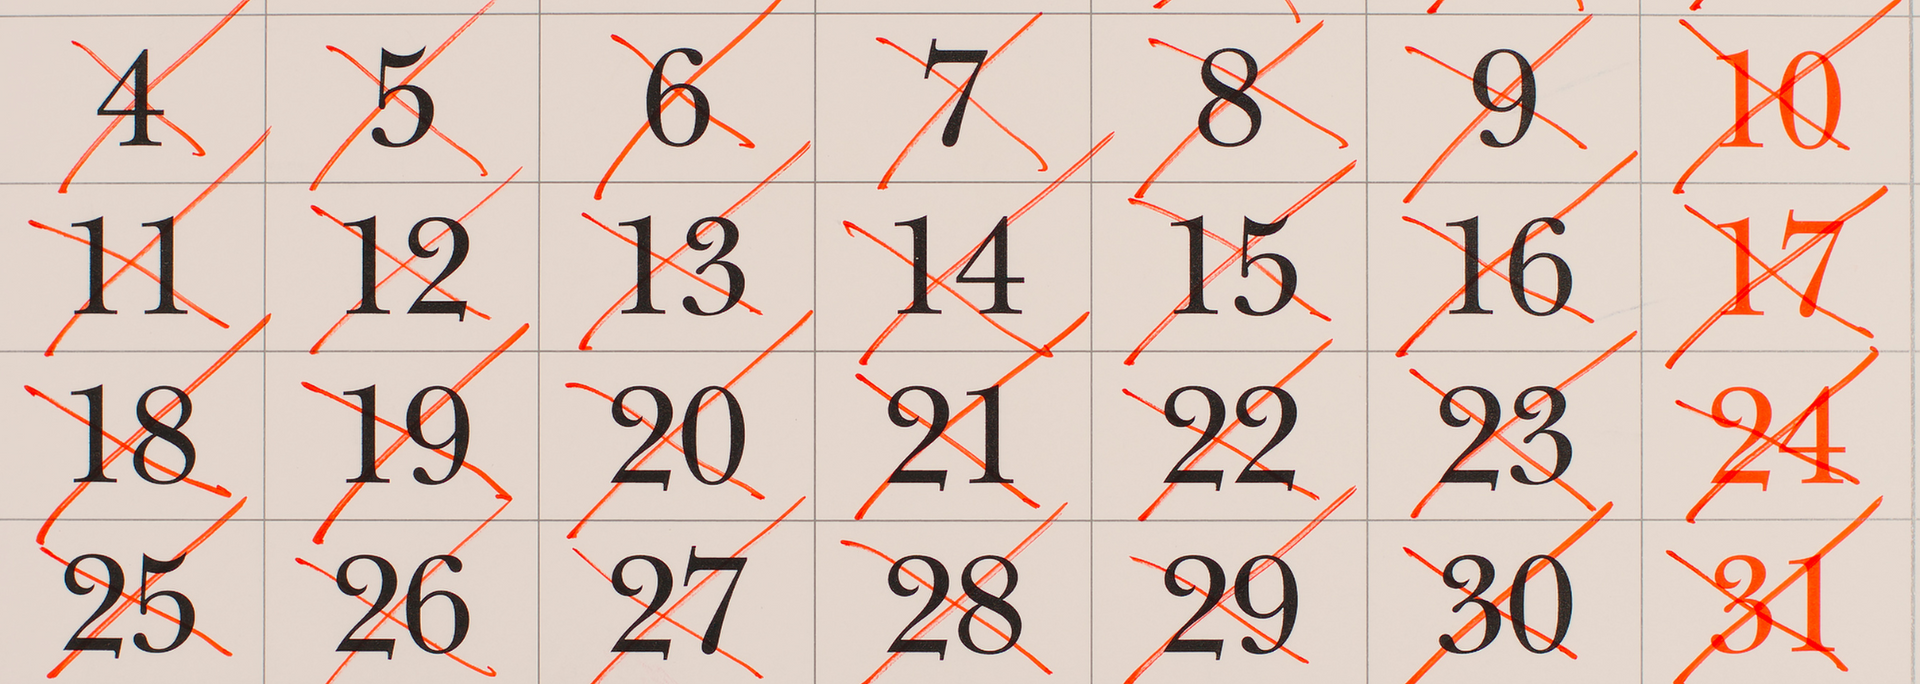 Picture of a calendar with all the days marked off